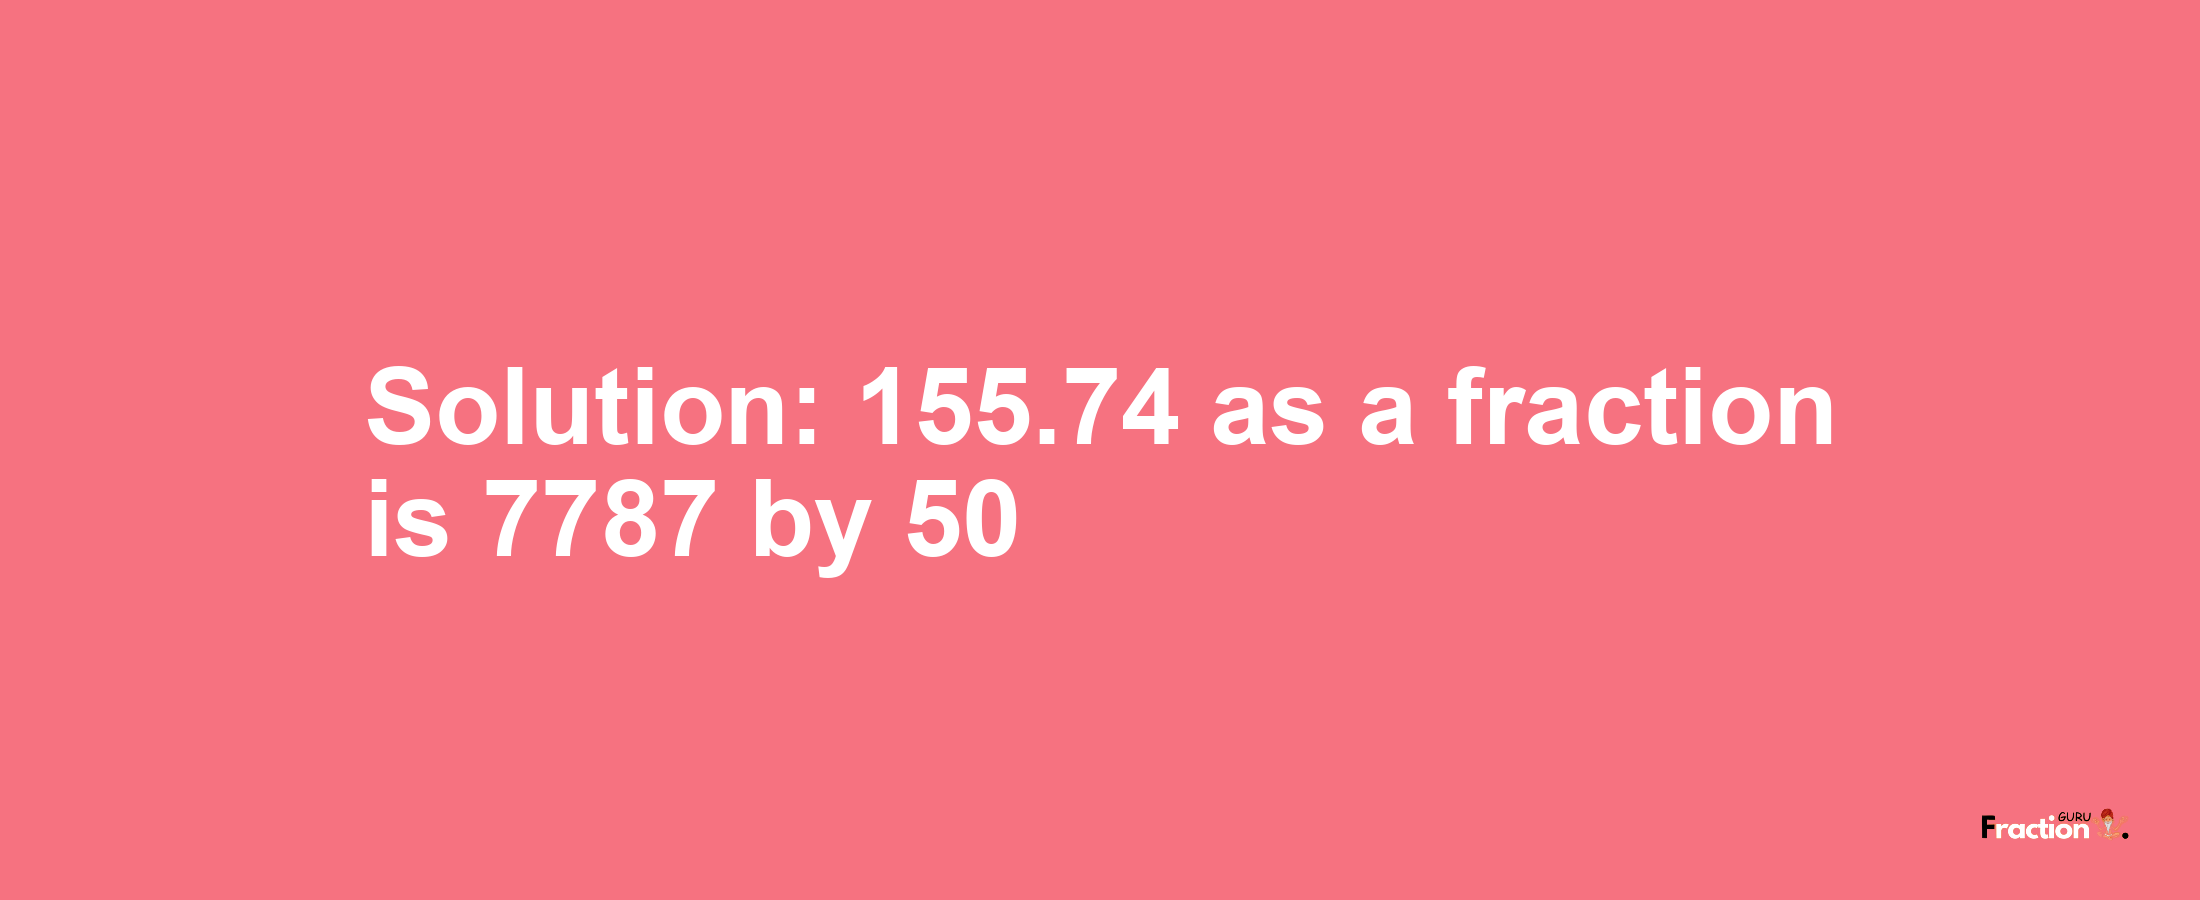 Solution:155.74 as a fraction is 7787/50